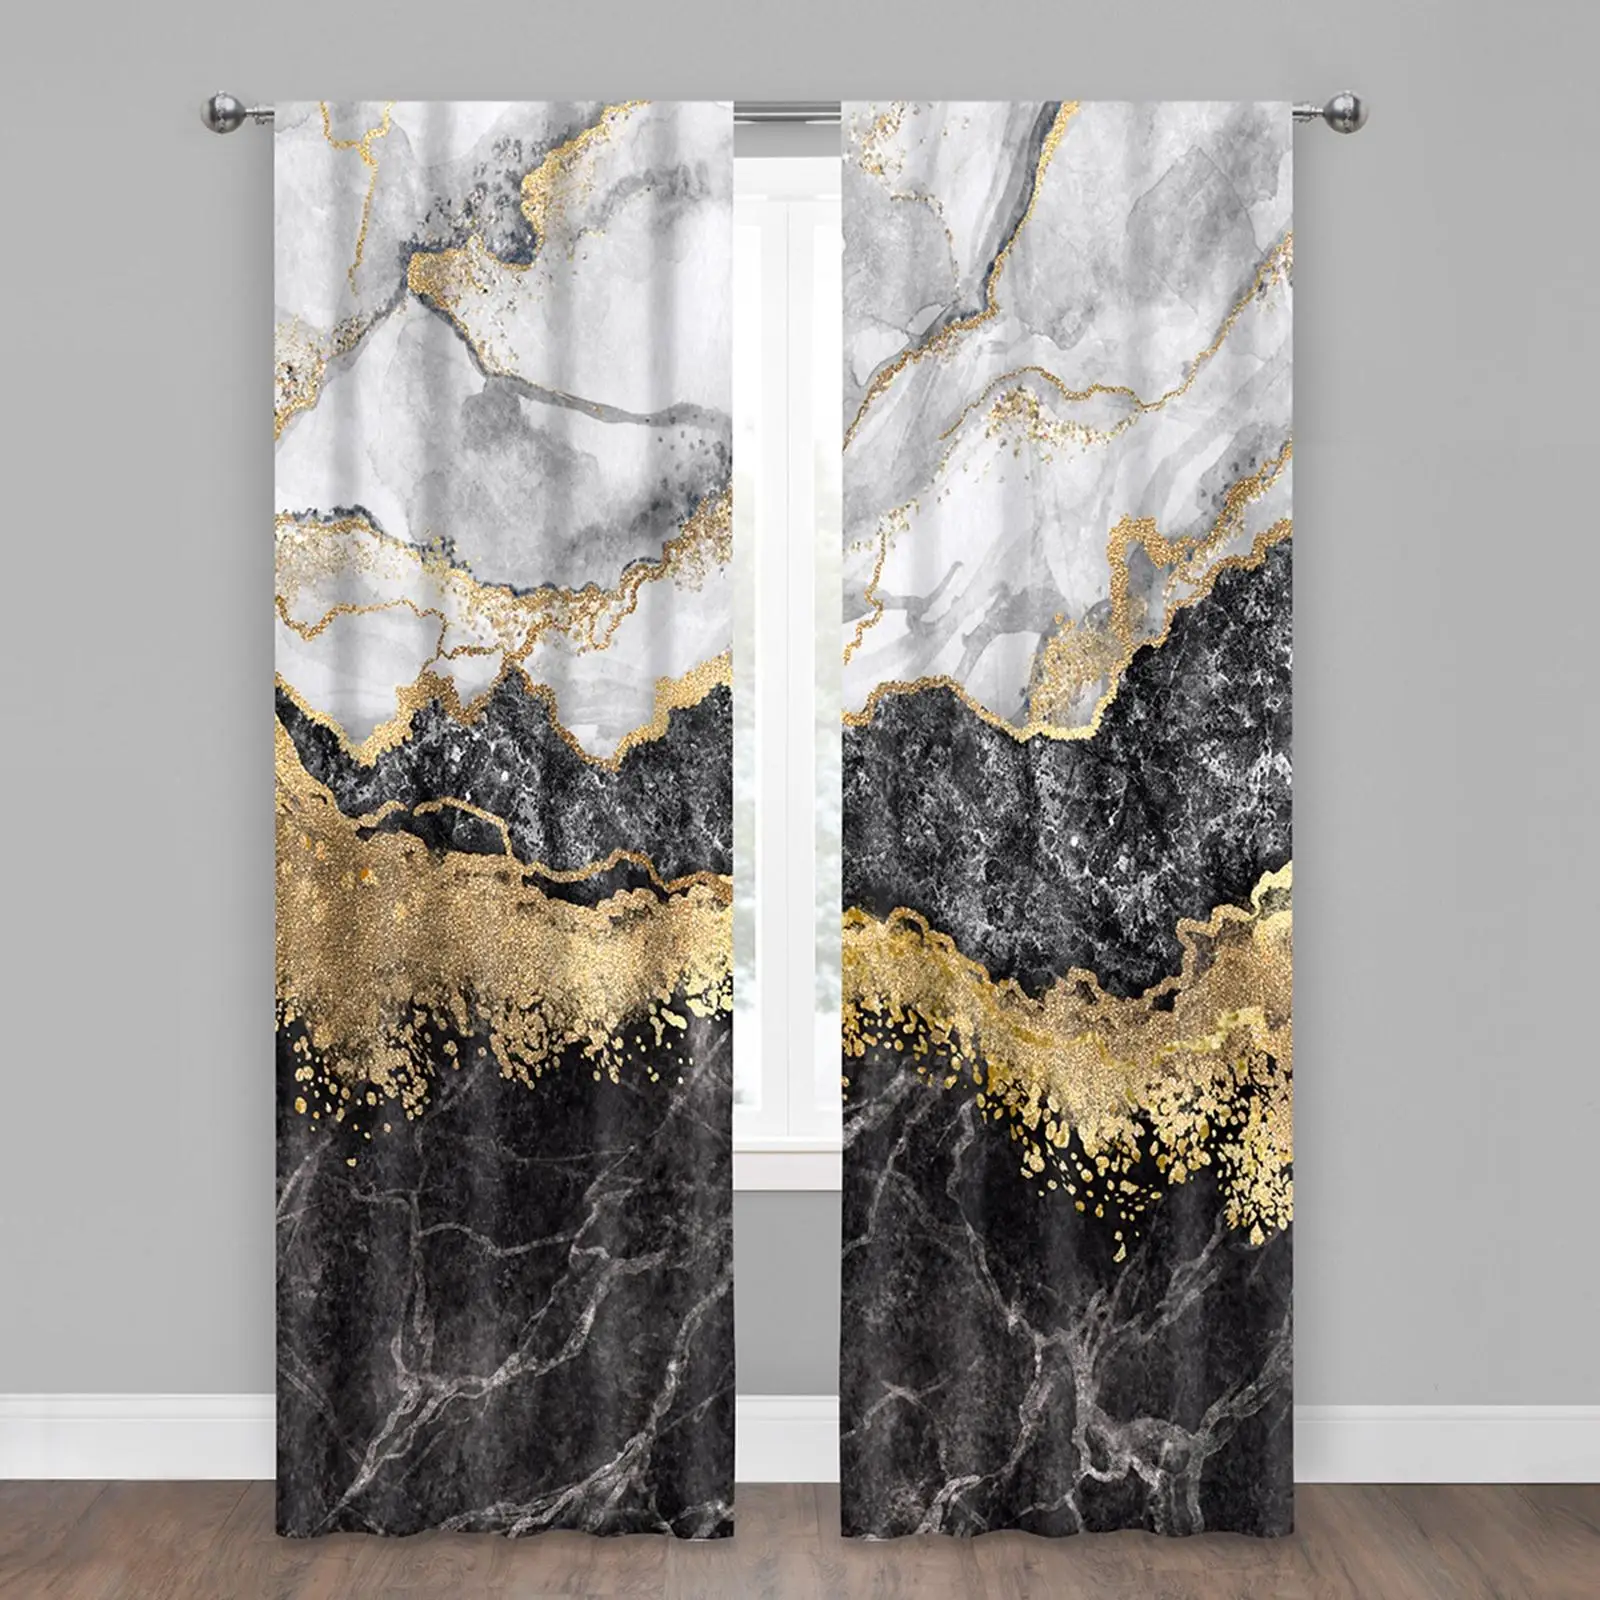 2x Marble Print Blackout Curtains 51.97inchx94.88inch Decorative Drapes for Guestroom, Farmhouse, Kitchen, Sun Room, Office